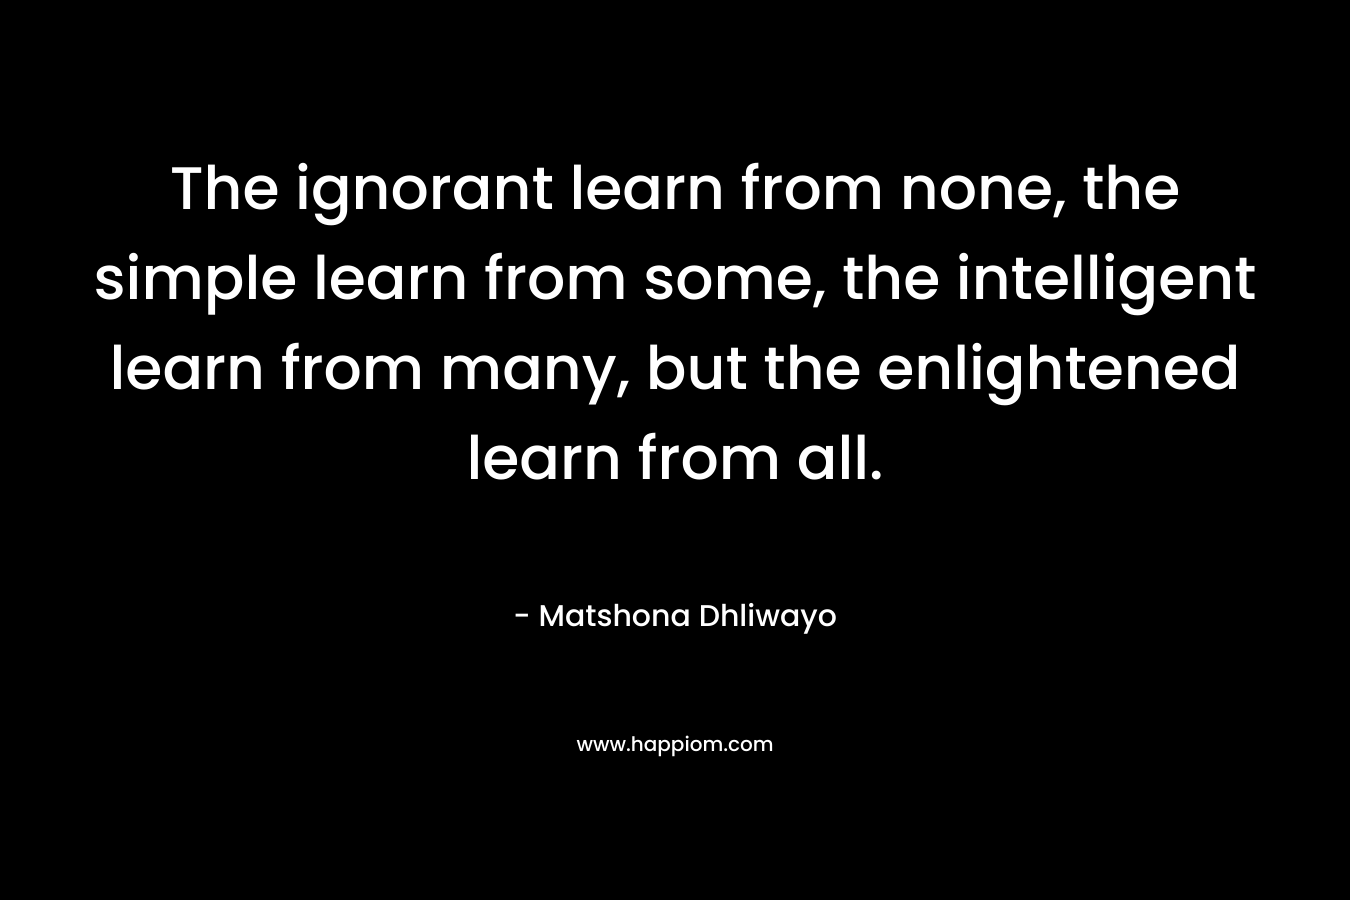 The ignorant learn from none, the simple learn from some, the intelligent learn from many, but the enlightened learn from all.